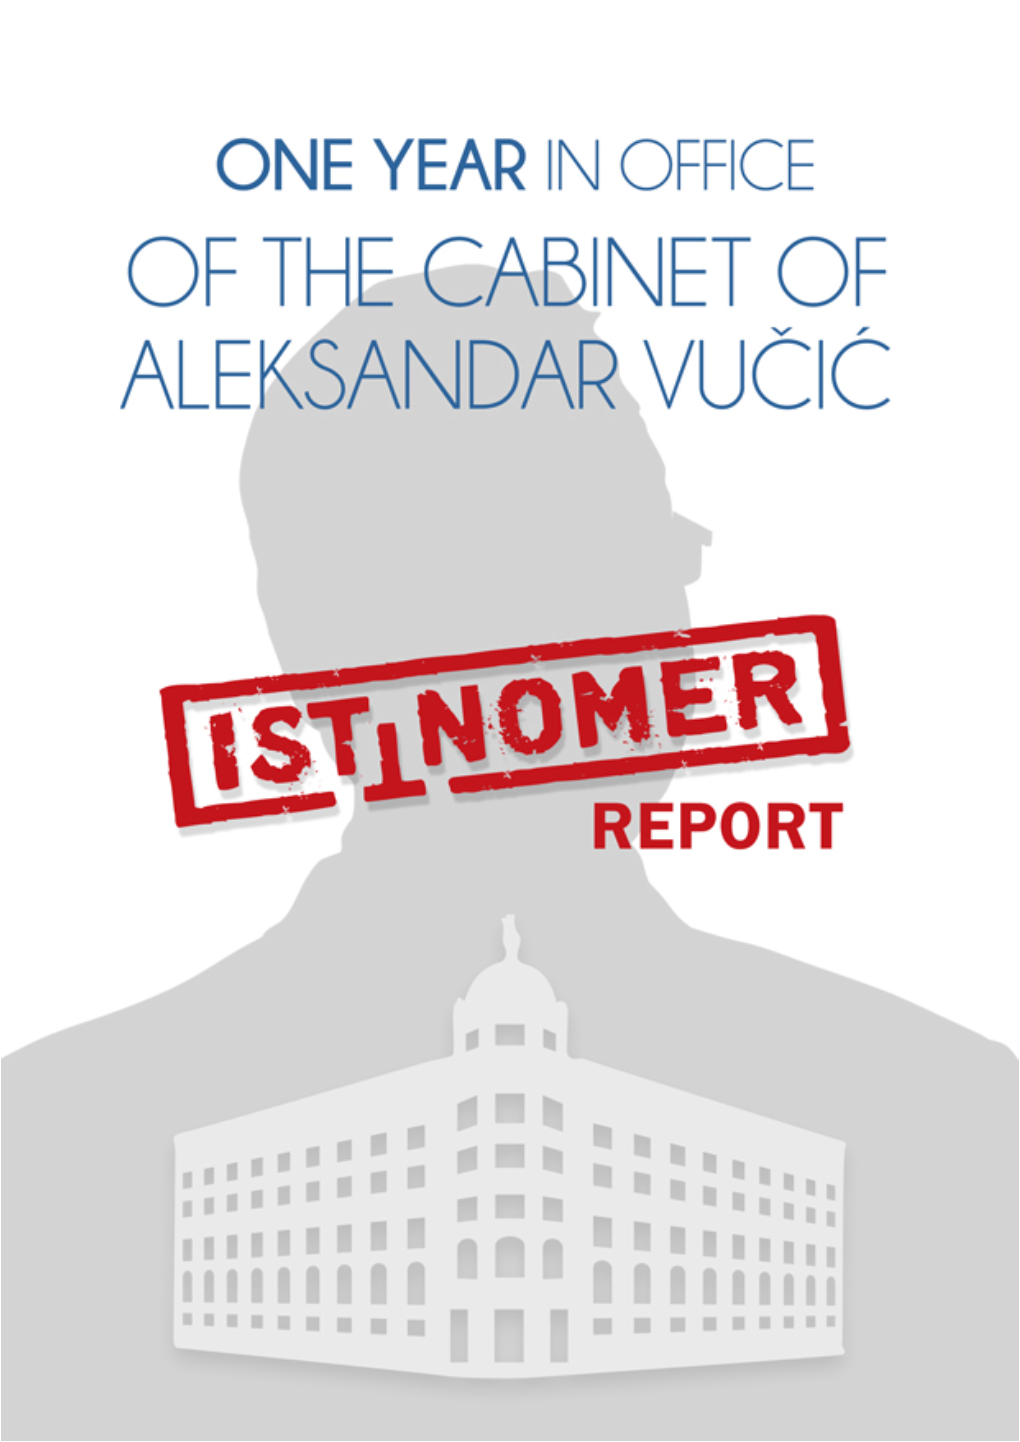 One Year in Office of the Cabinet of Aleksandar Vucic - Reviewed by Istinomer 1